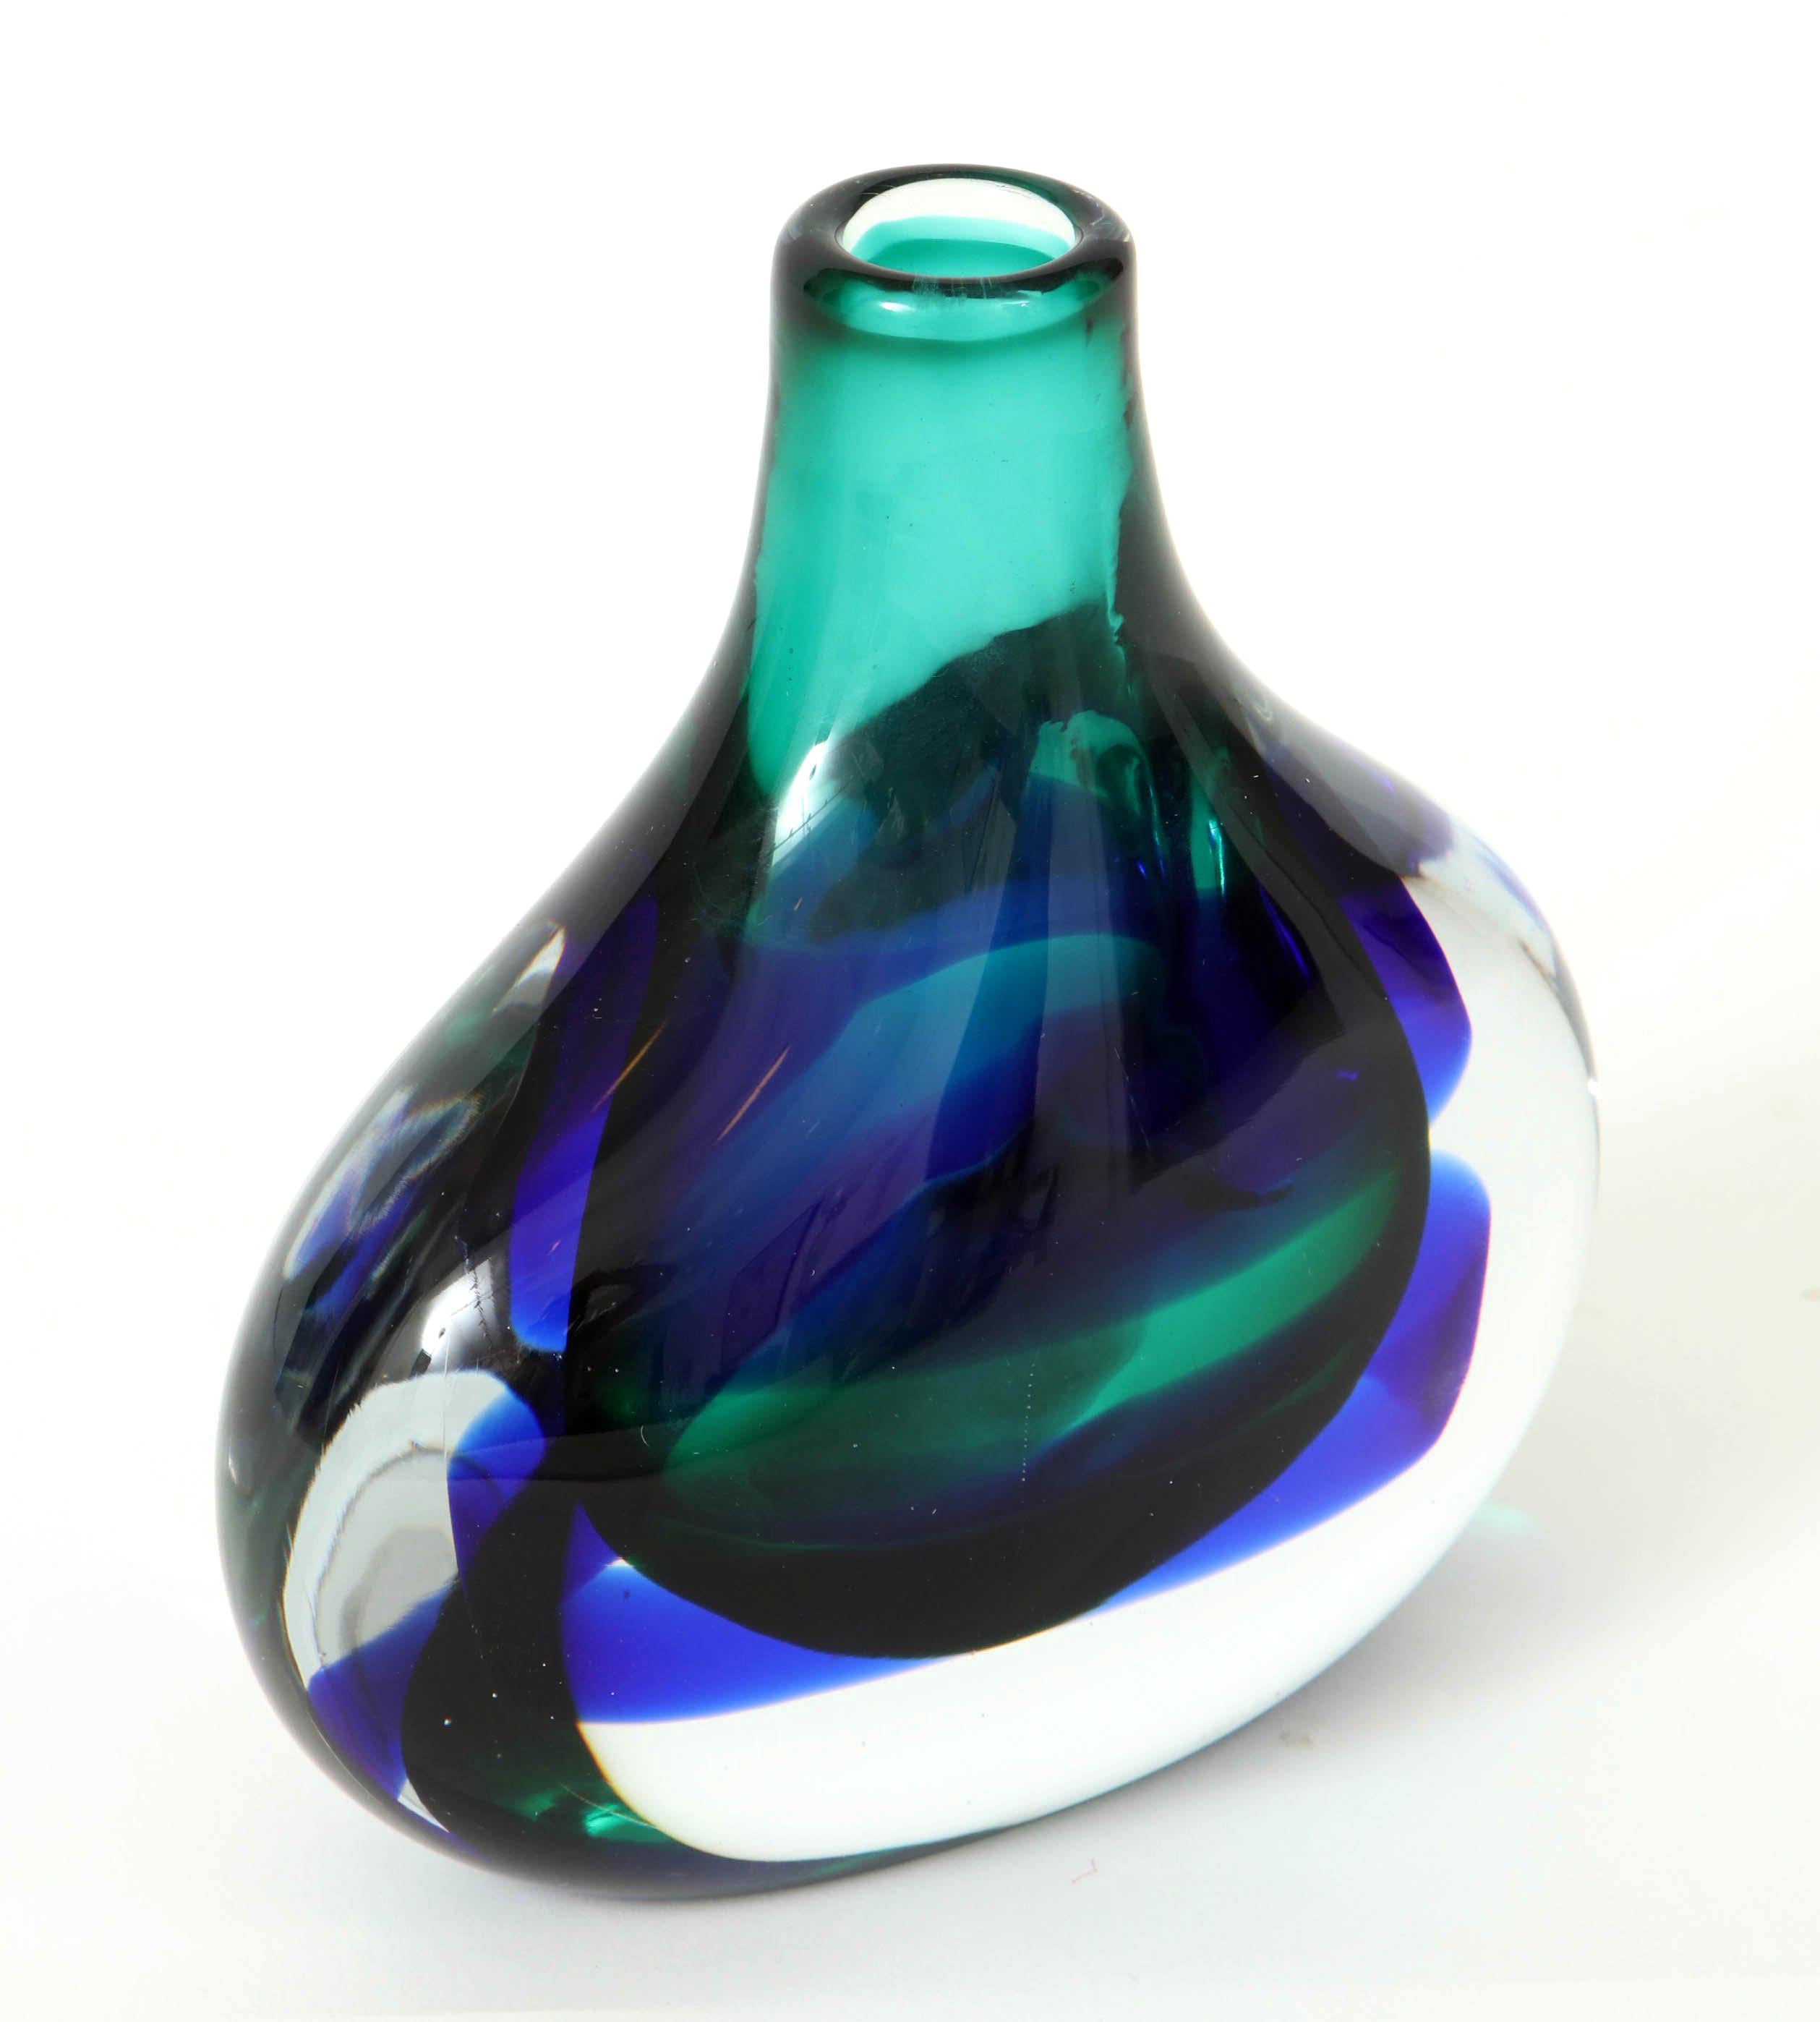 Stunning Murano glass vase in jewel colors by the talented Luciano Gaspari by Salviati. Beautiful and chunky flask shaped vase in royal blue and soft greens with geometric patterns. Signed. Great piece that works well with other Murano glass pieces.